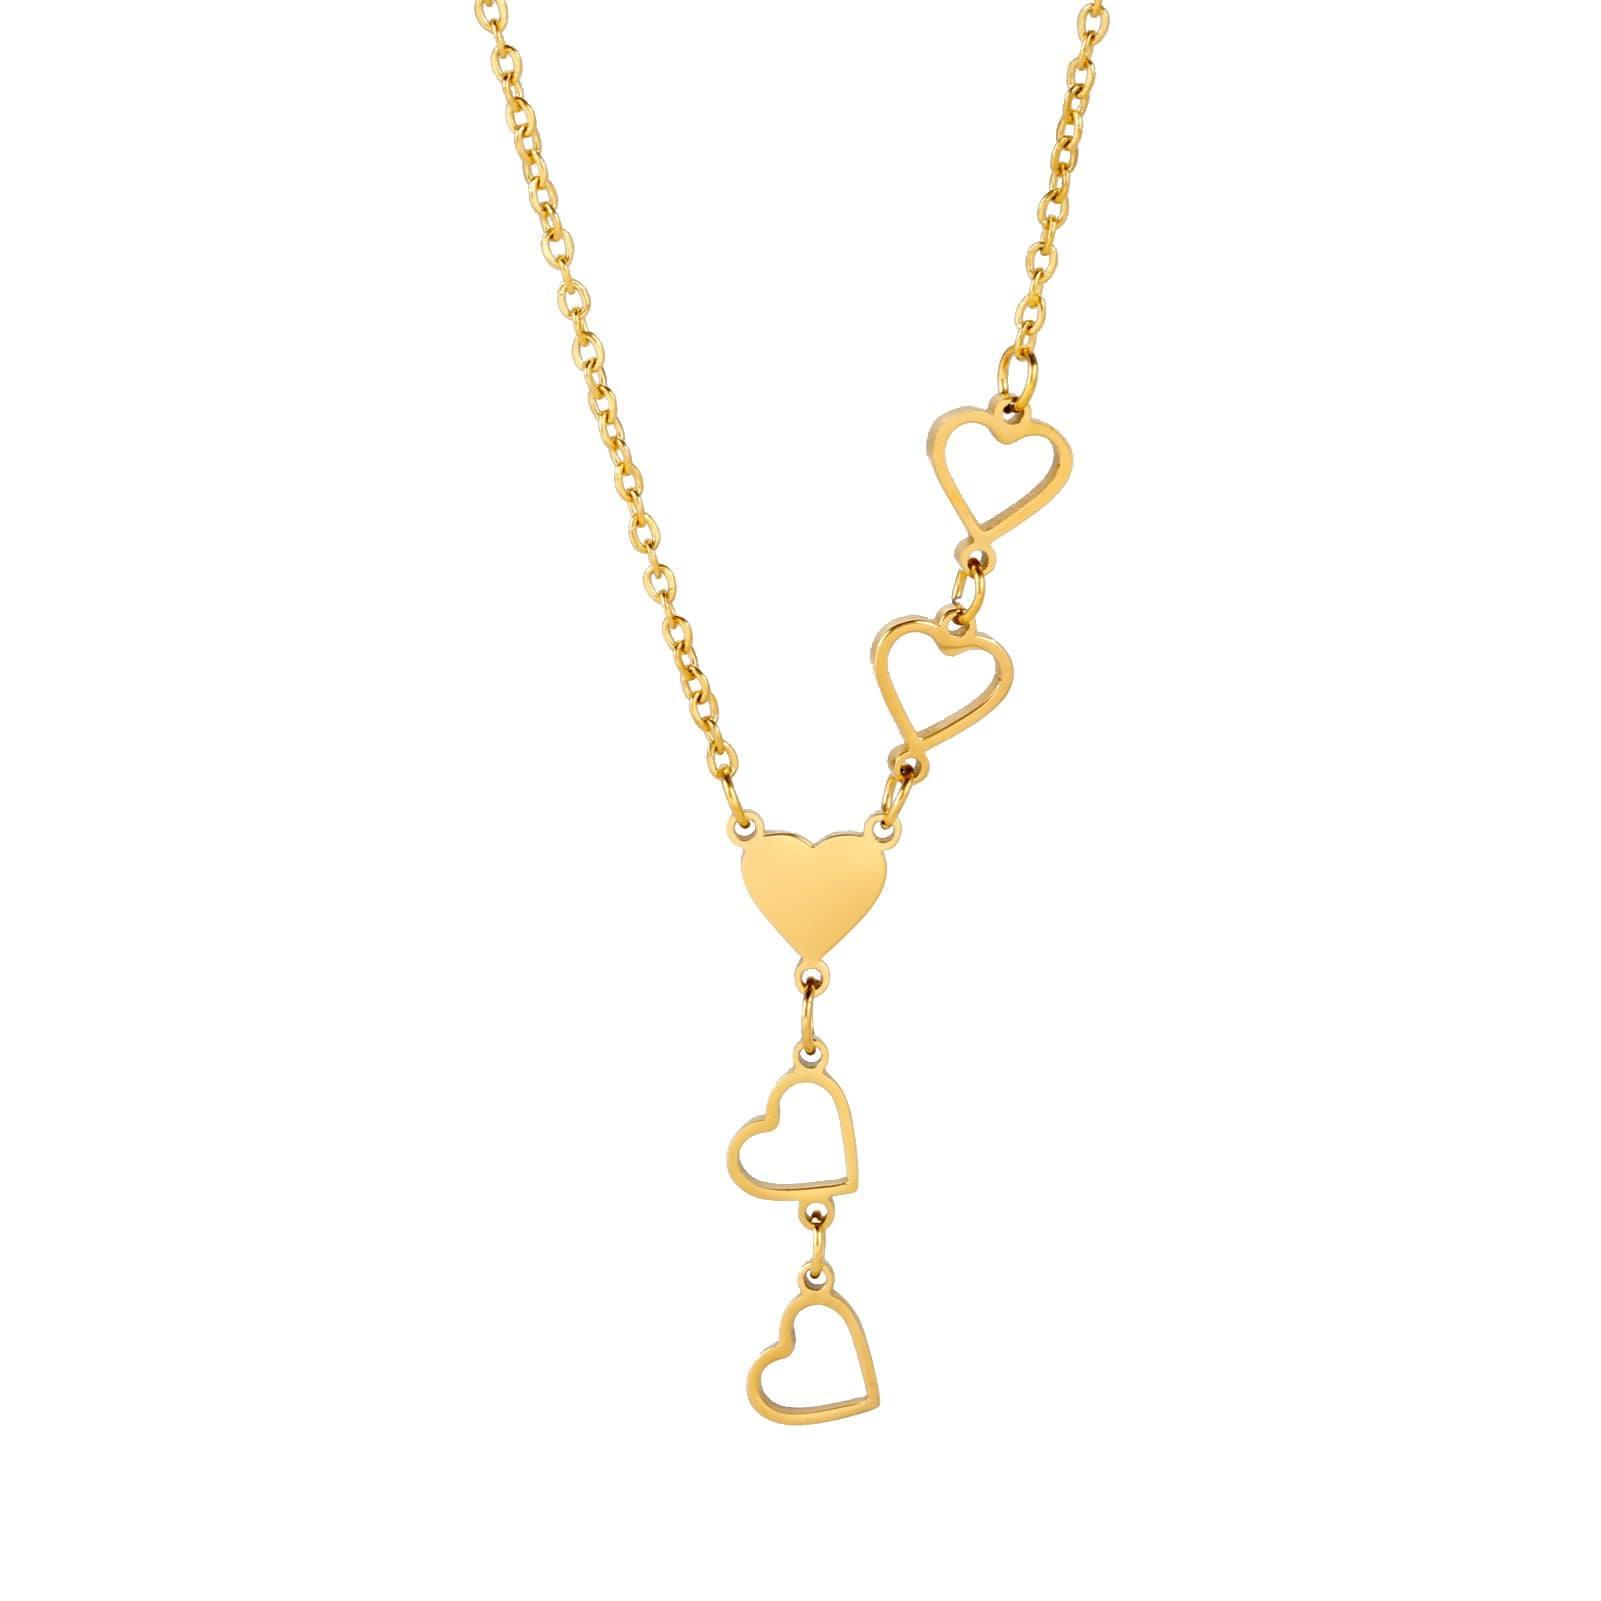 Chic Heart Chain Necklaces in Silver and Gold-B-12